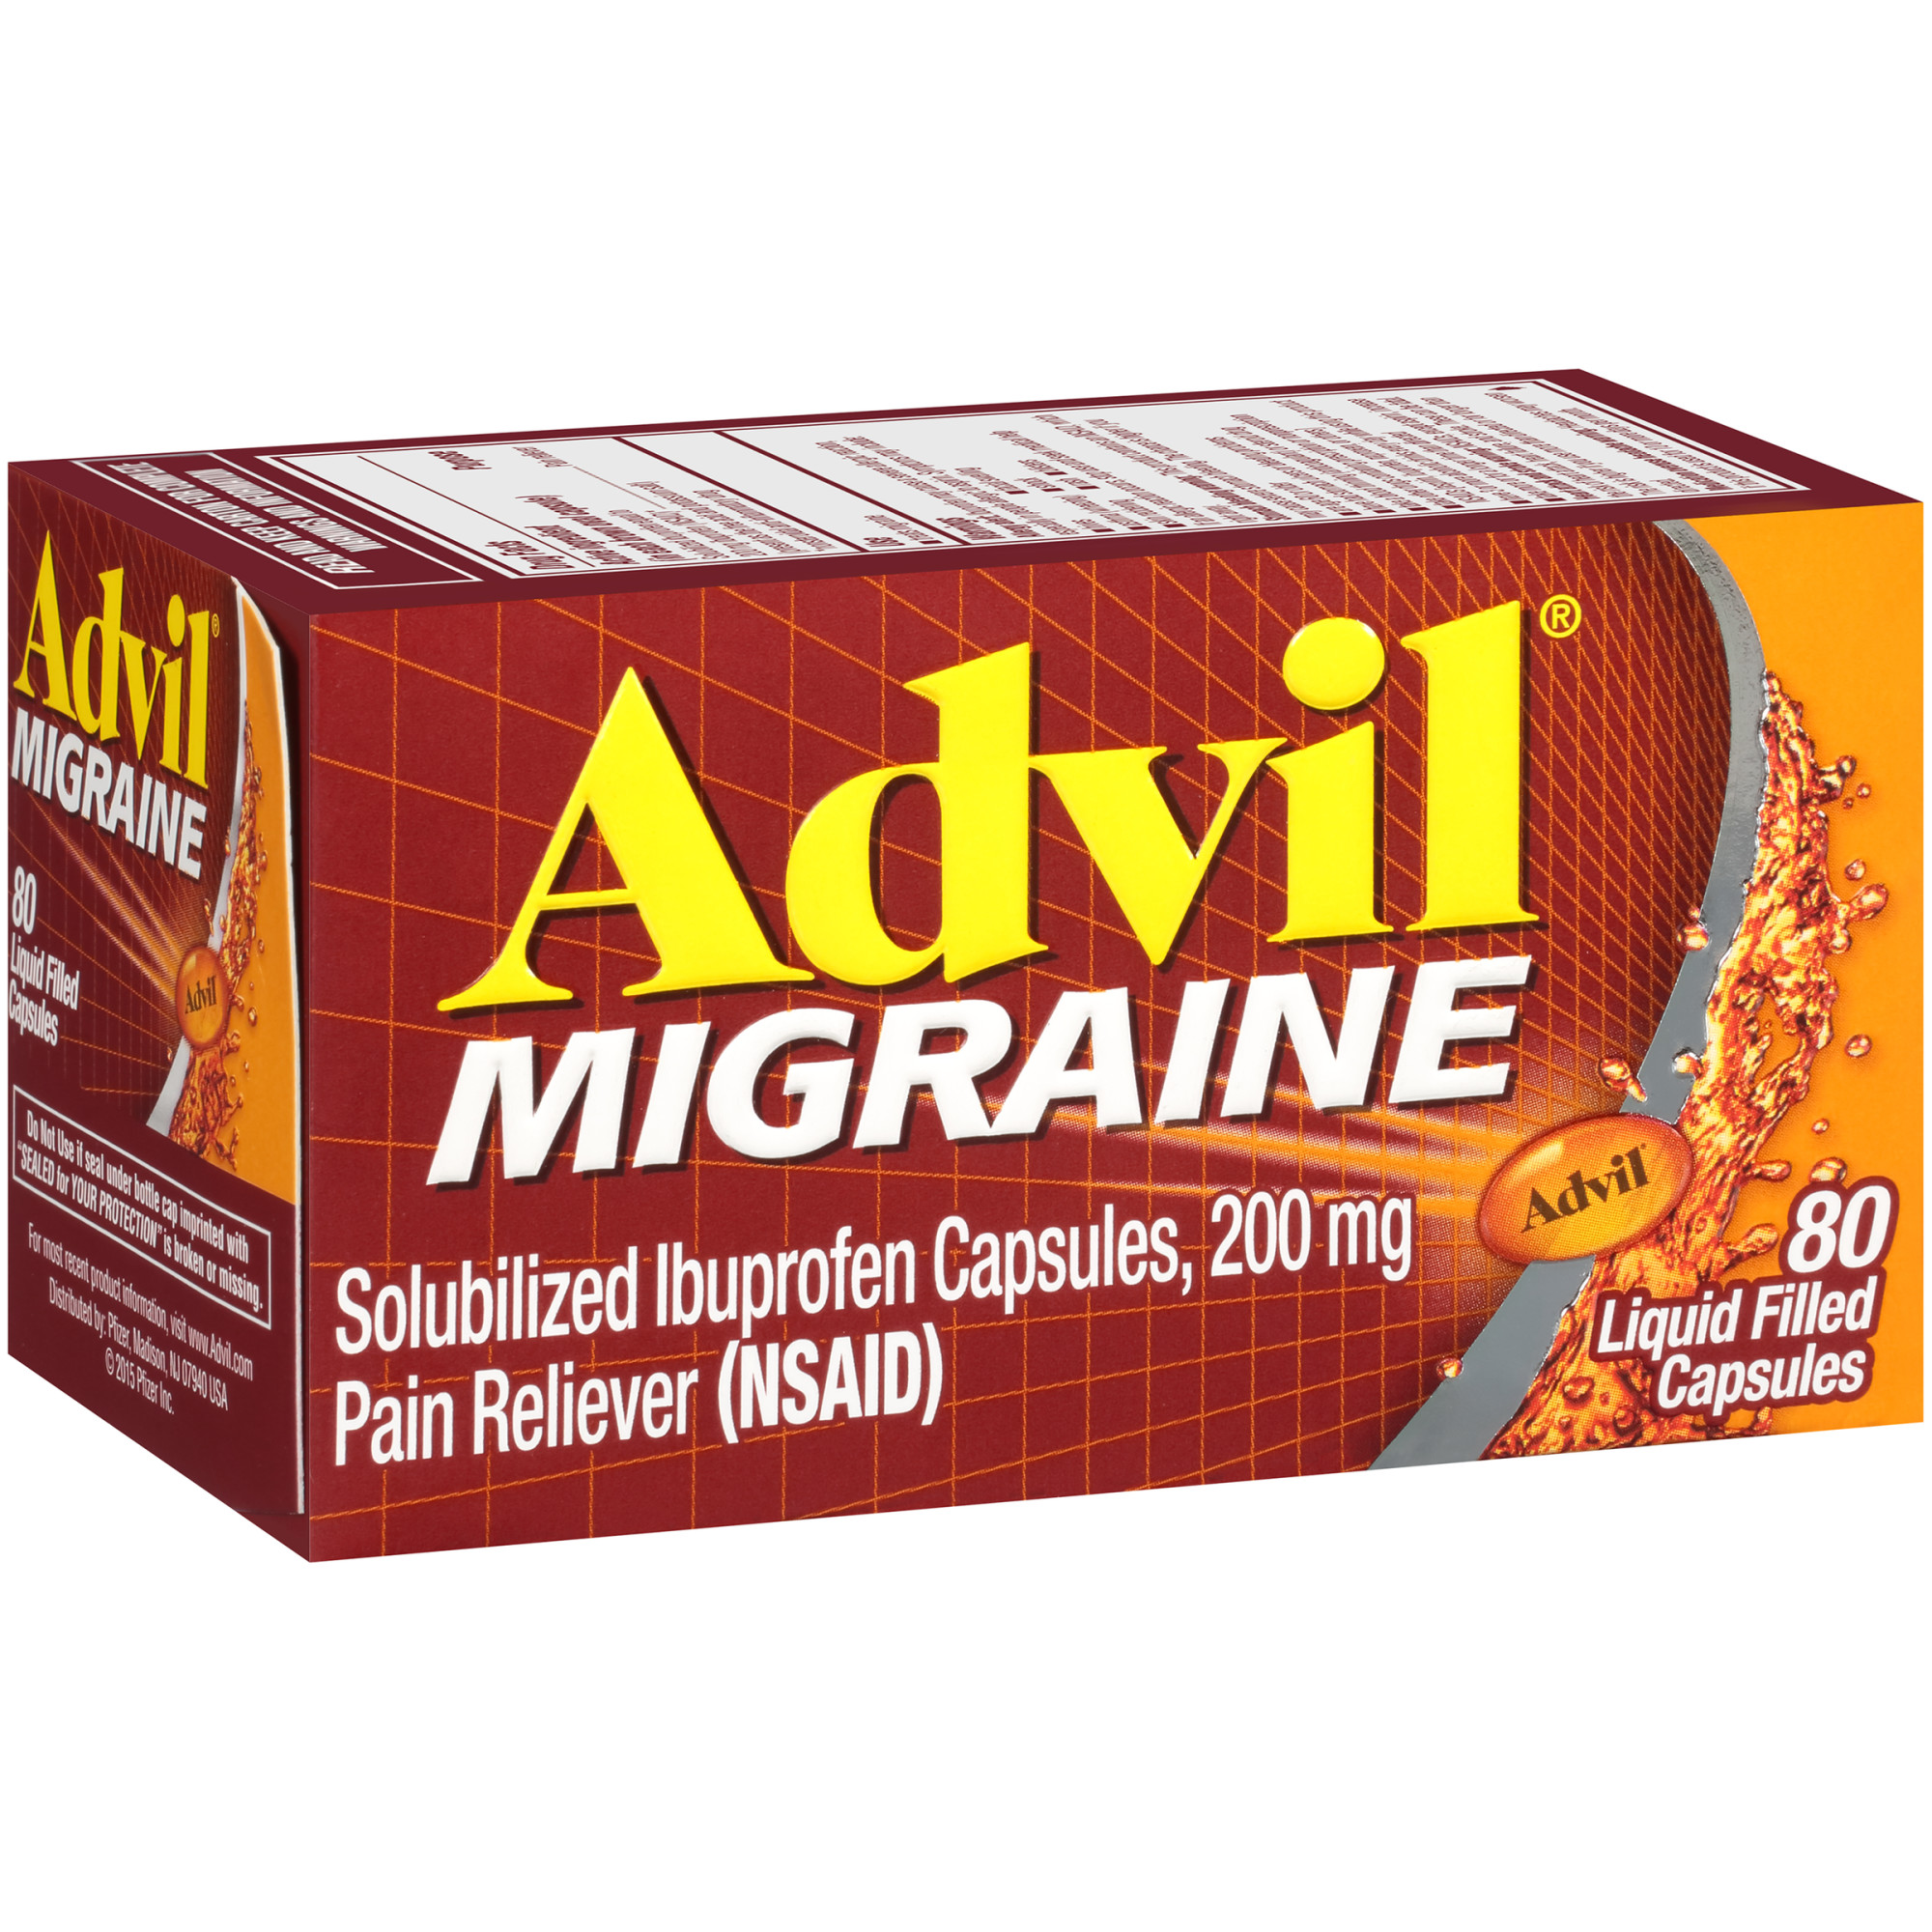 Advil Pain Relievers and Fever Reducer Liquid Filled Capsules, 200 Mg Ibuprofen, 80 Count - image 1 of 5